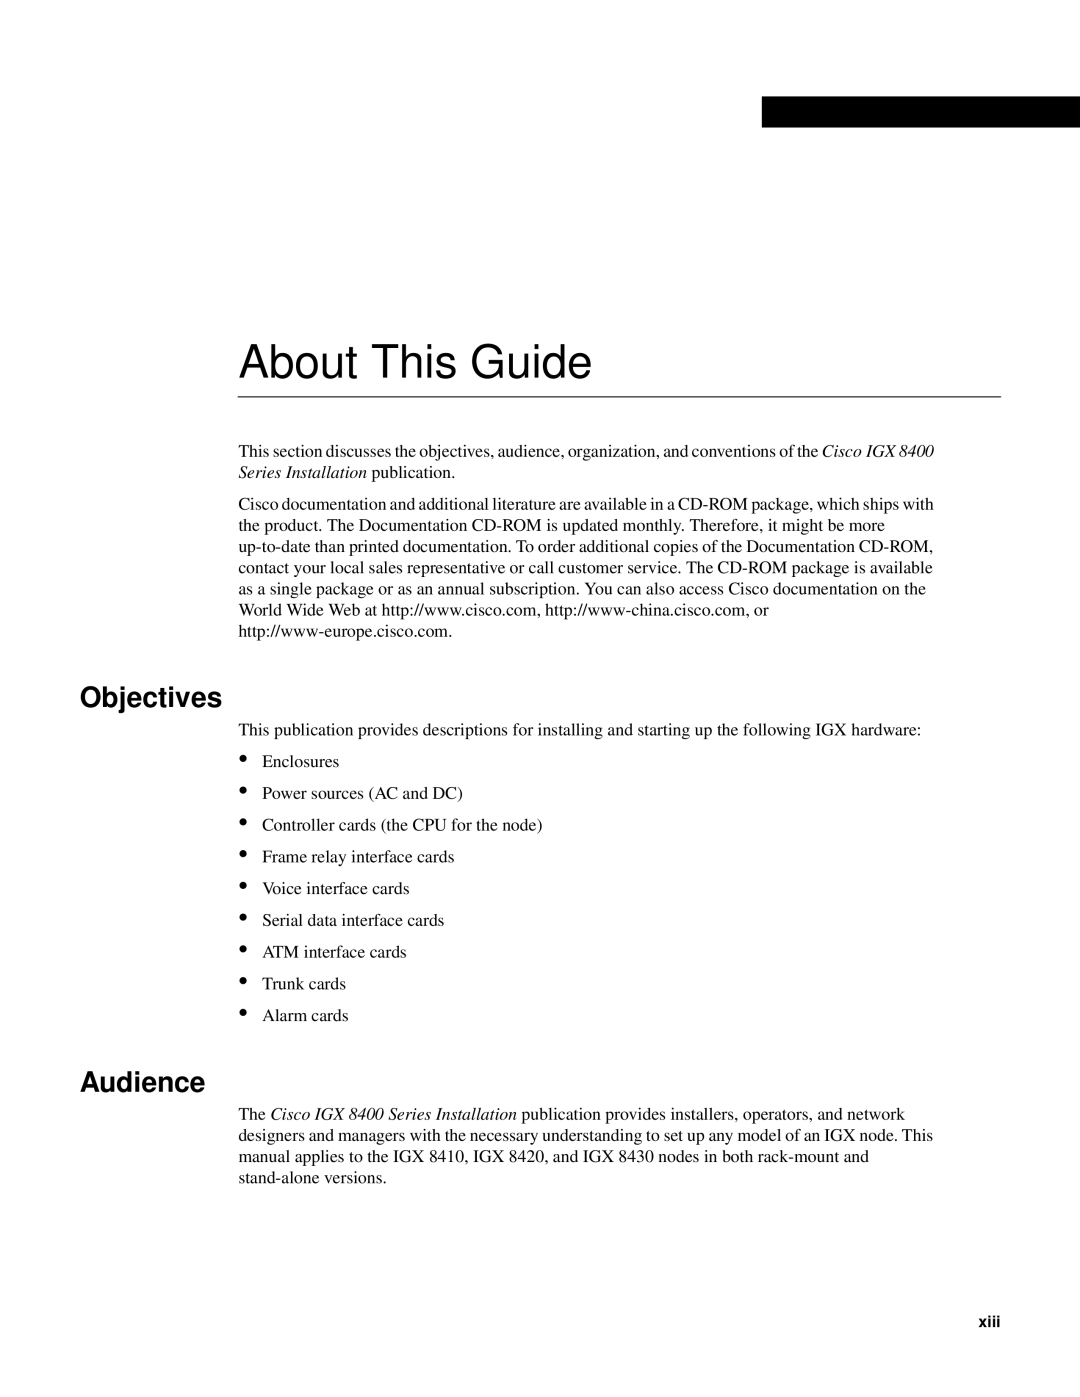 Cisco Systems IGX 8410, IGX 8420 manual Objectives, Audience, About This Guide 